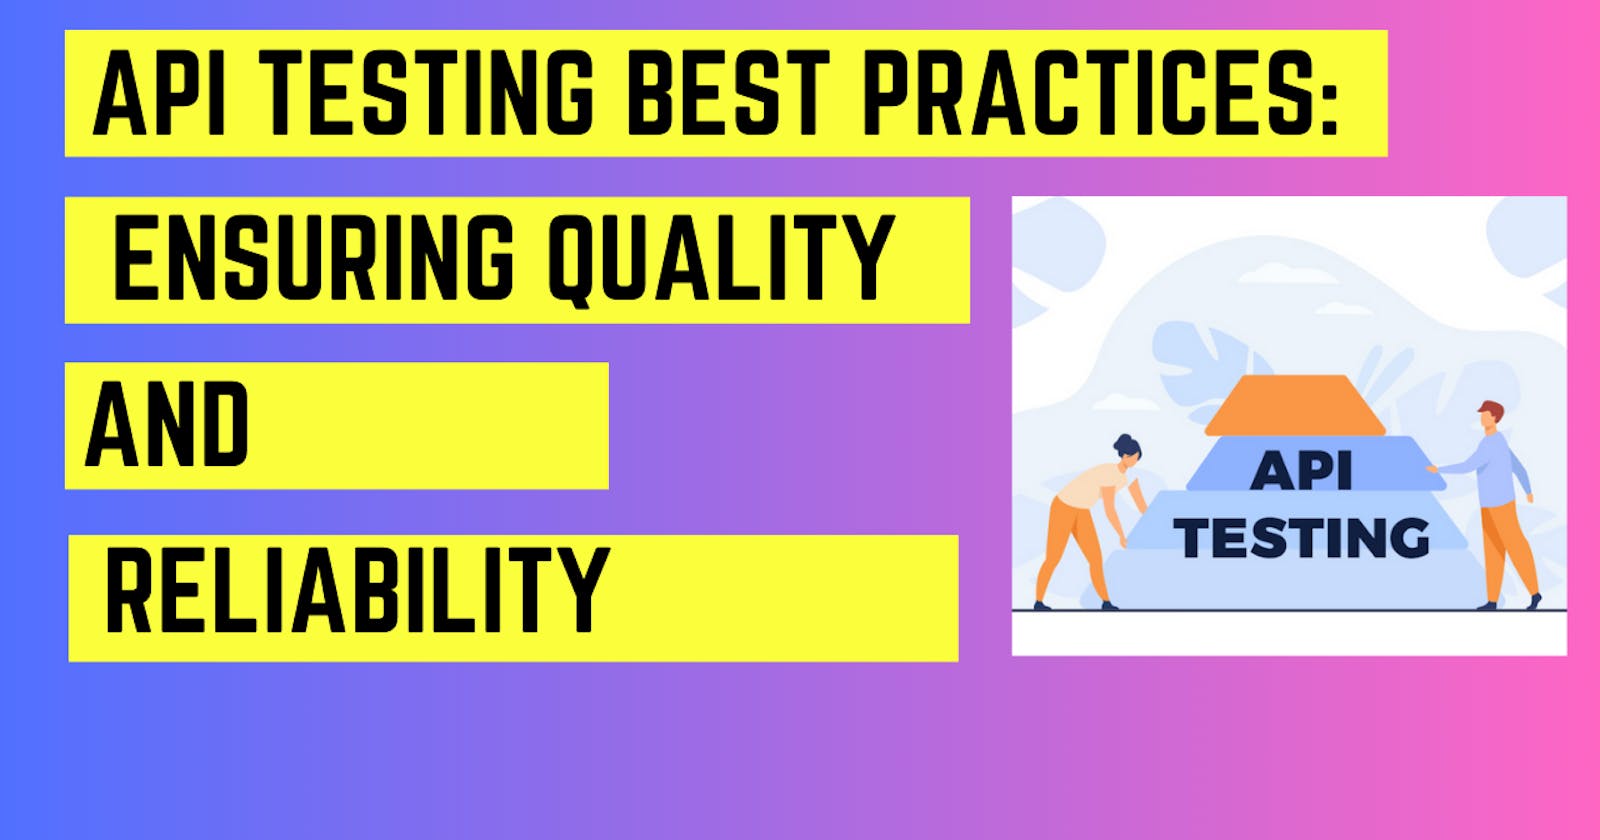 API Testing Best Practices: Ensuring Quality and Reliability